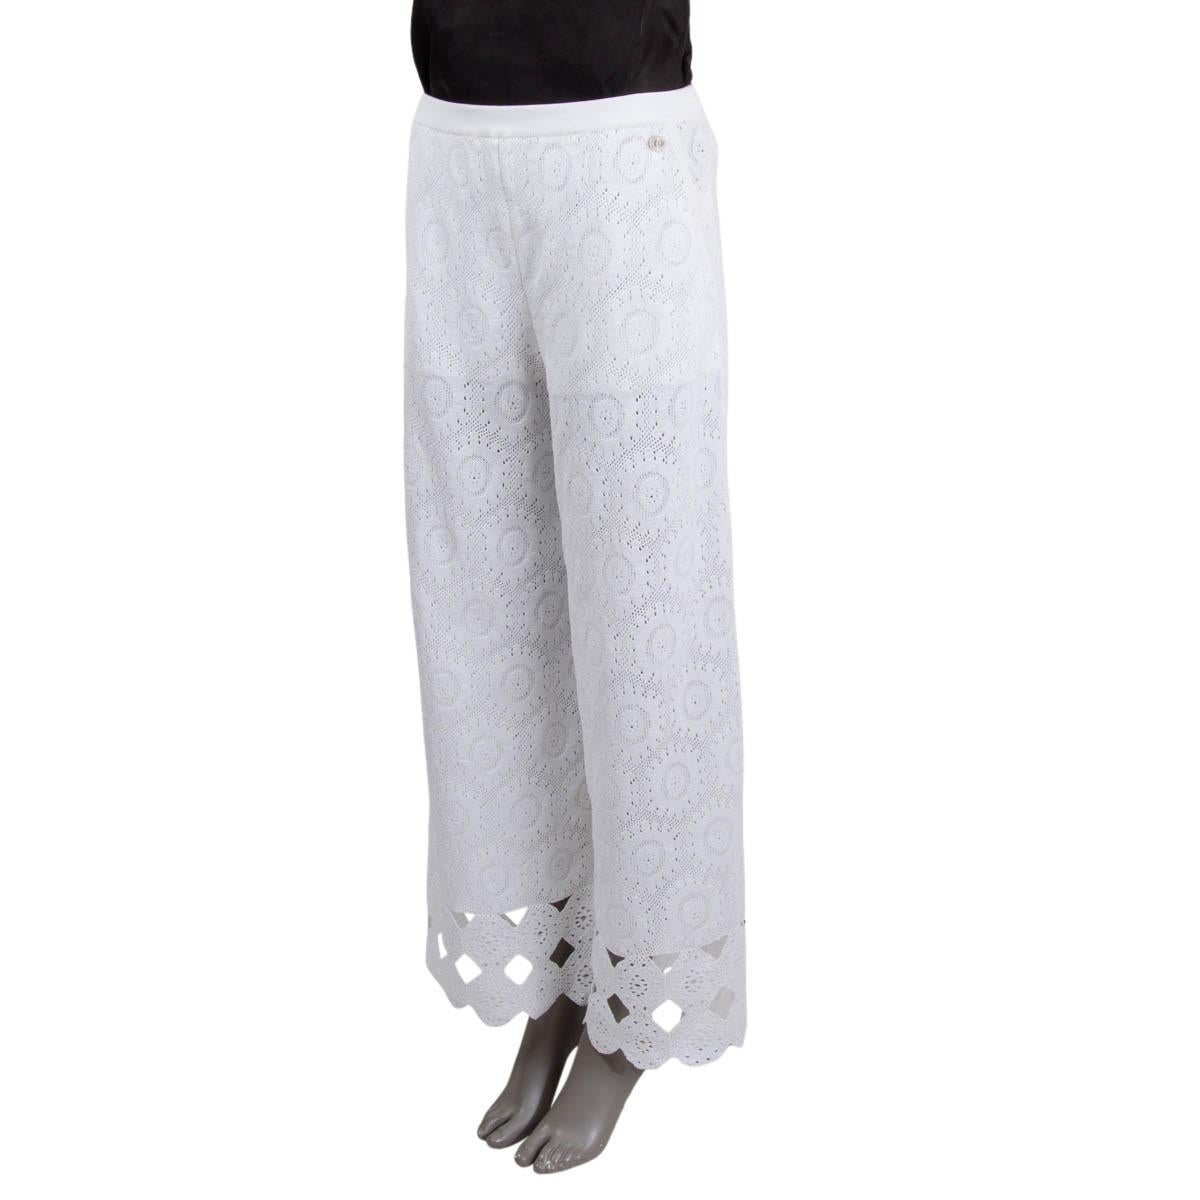 100% authentic Chanel 2020 high waist wide leg knitted crochet pants in white cotton (99%) and polyamide (1%) with a scalloped bottom hem. The top parts is lined and the legs are sheer. The design features two side slit pockets and an elastic